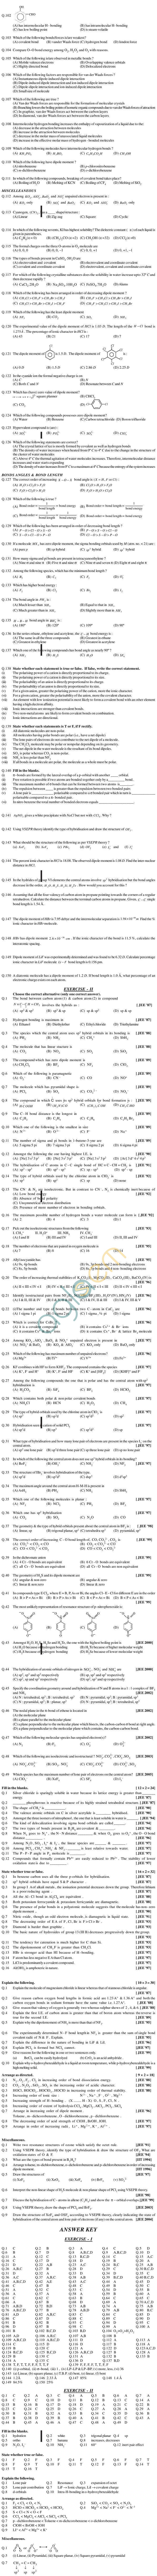 Chemistry Study Material - Chapter 4